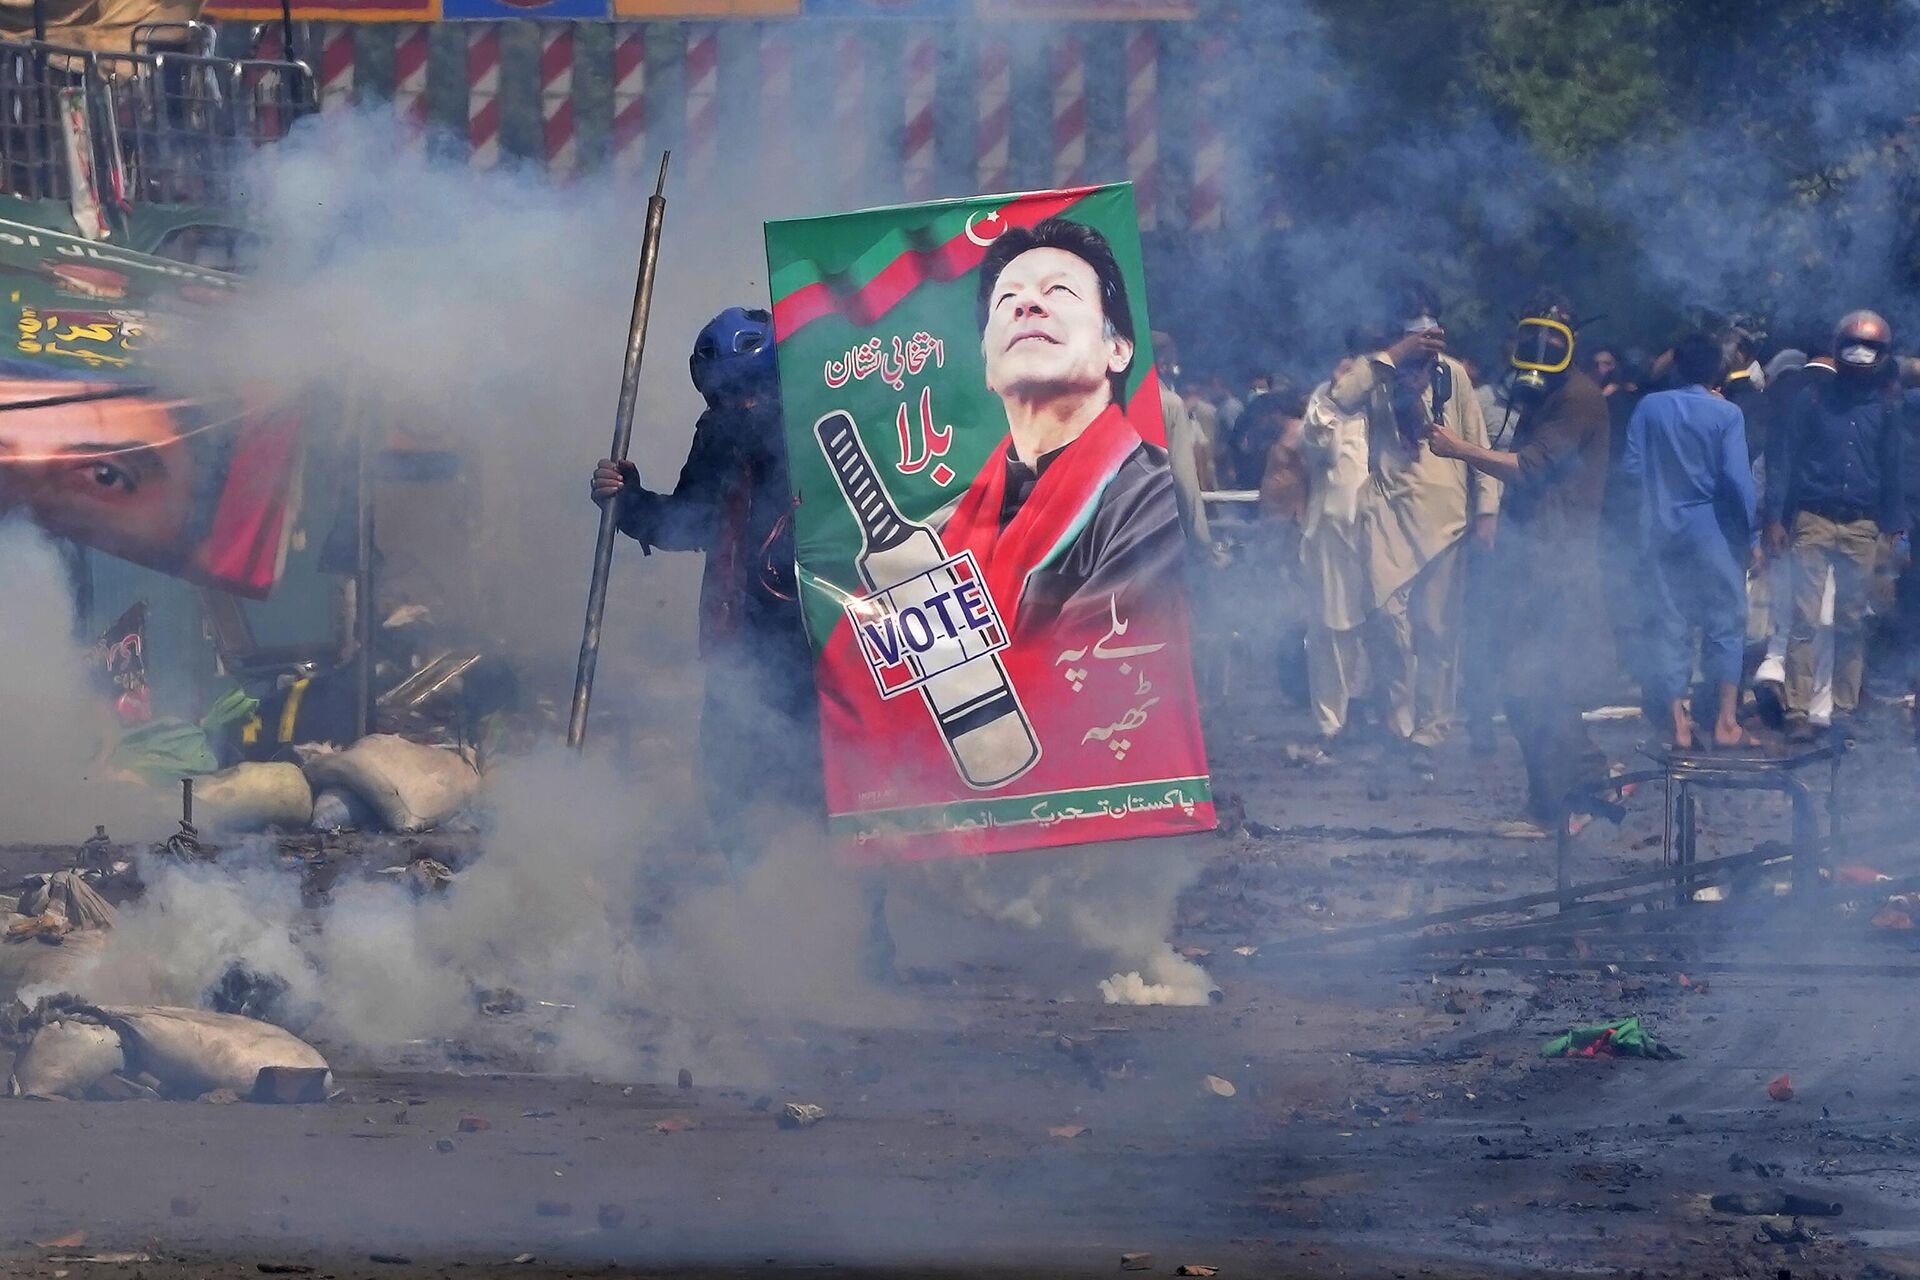 Supporters of former Prime Minister Imran Khan take cover after riot police officers fire tear gas to disperse them during clashes, in Lahore, Pakistan, Wednesday, March 15, 2023. - Sputnik India, 1920, 18.03.2023